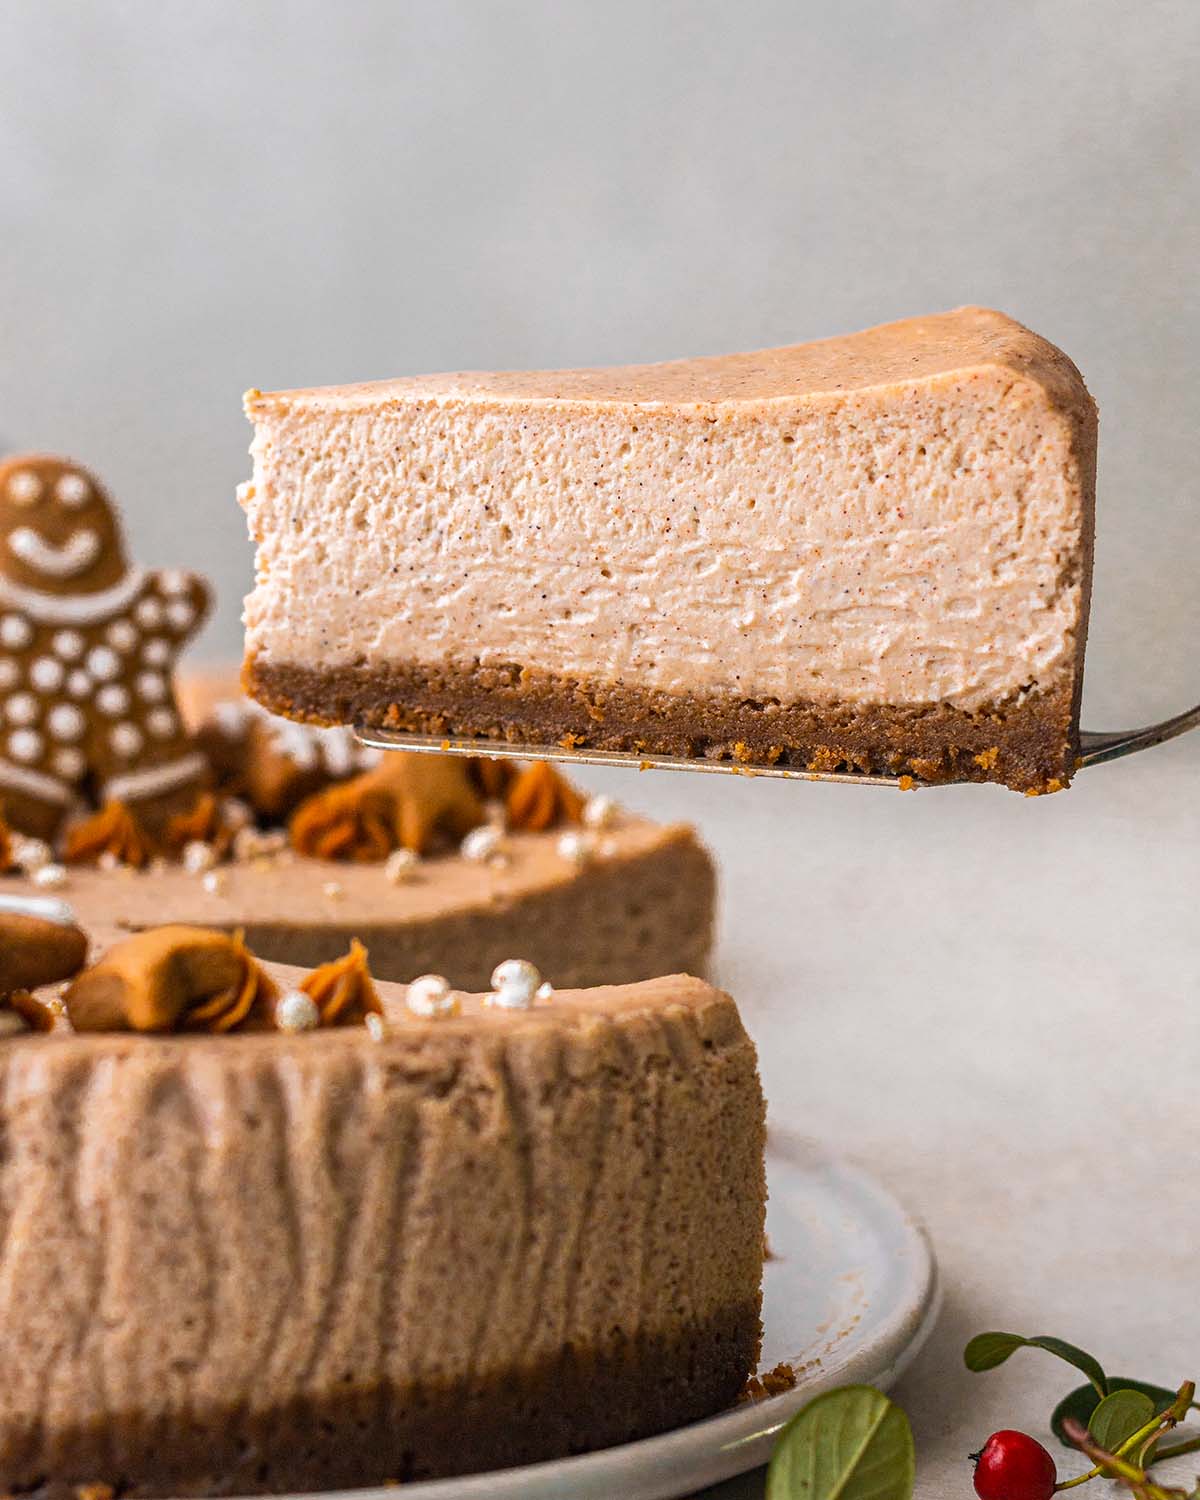 One slice of the gingerbread cheesecake lifted up showing creamy texture.